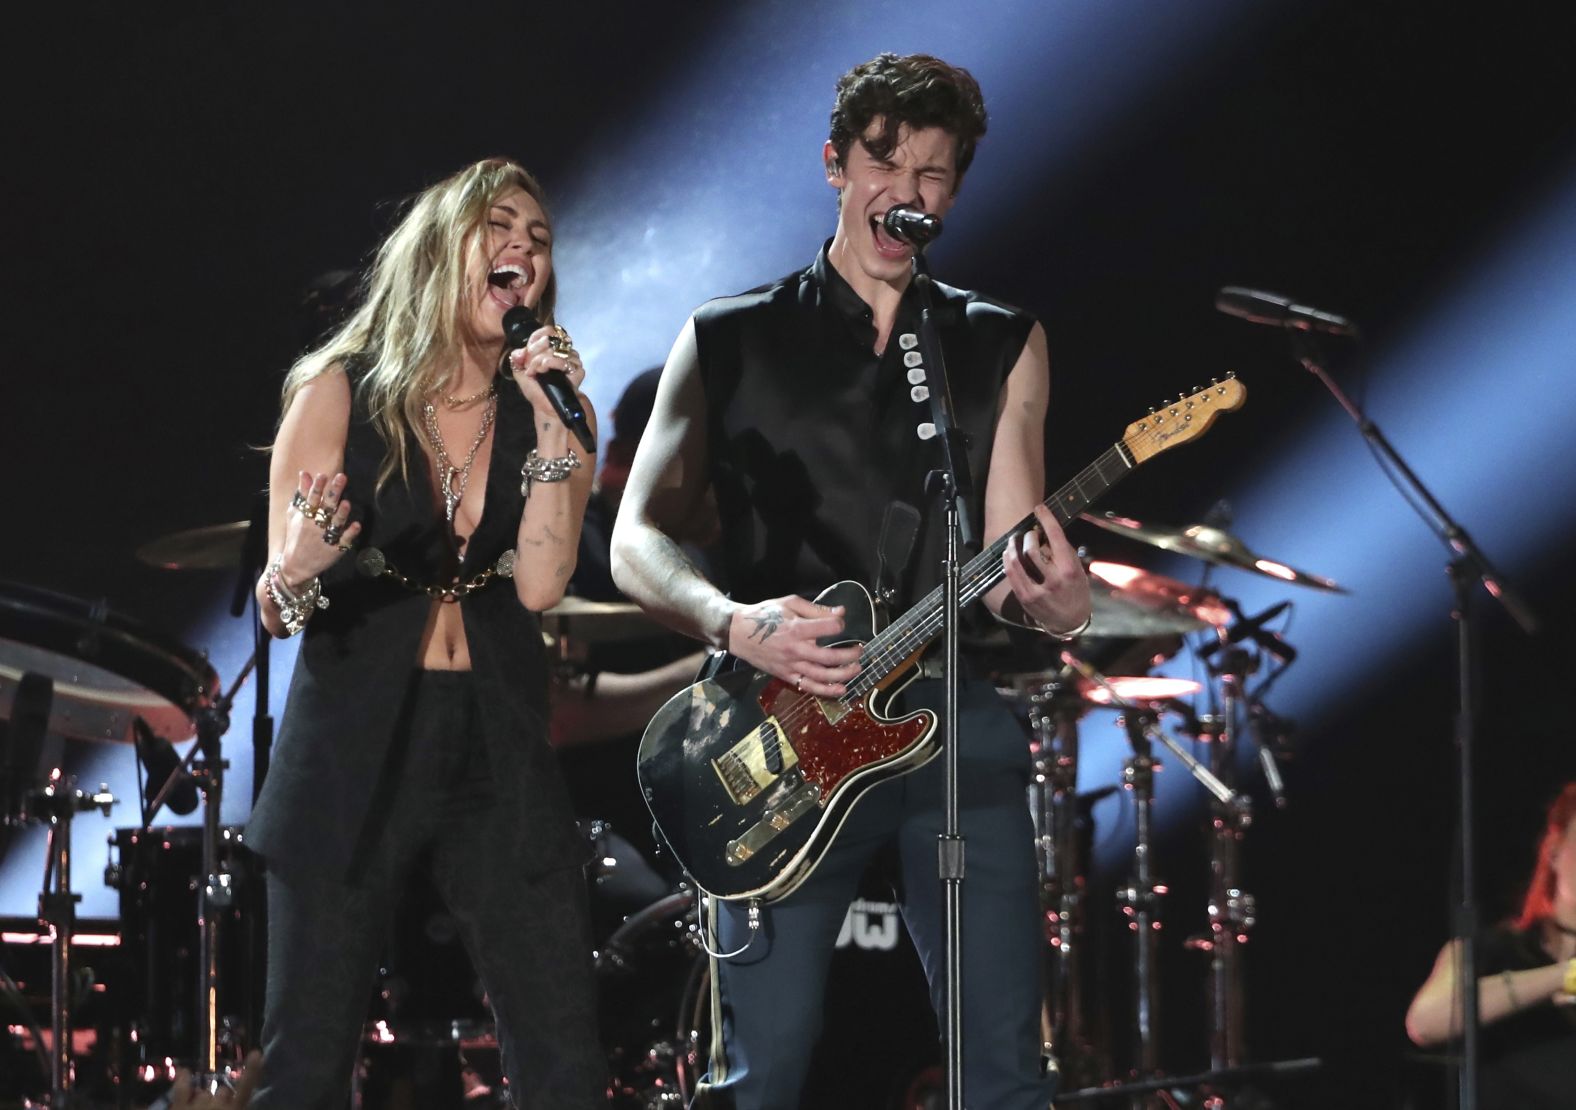 Miley Cyrus and Shawn Mendes perform "In My Blood" during the show's first half-hour.